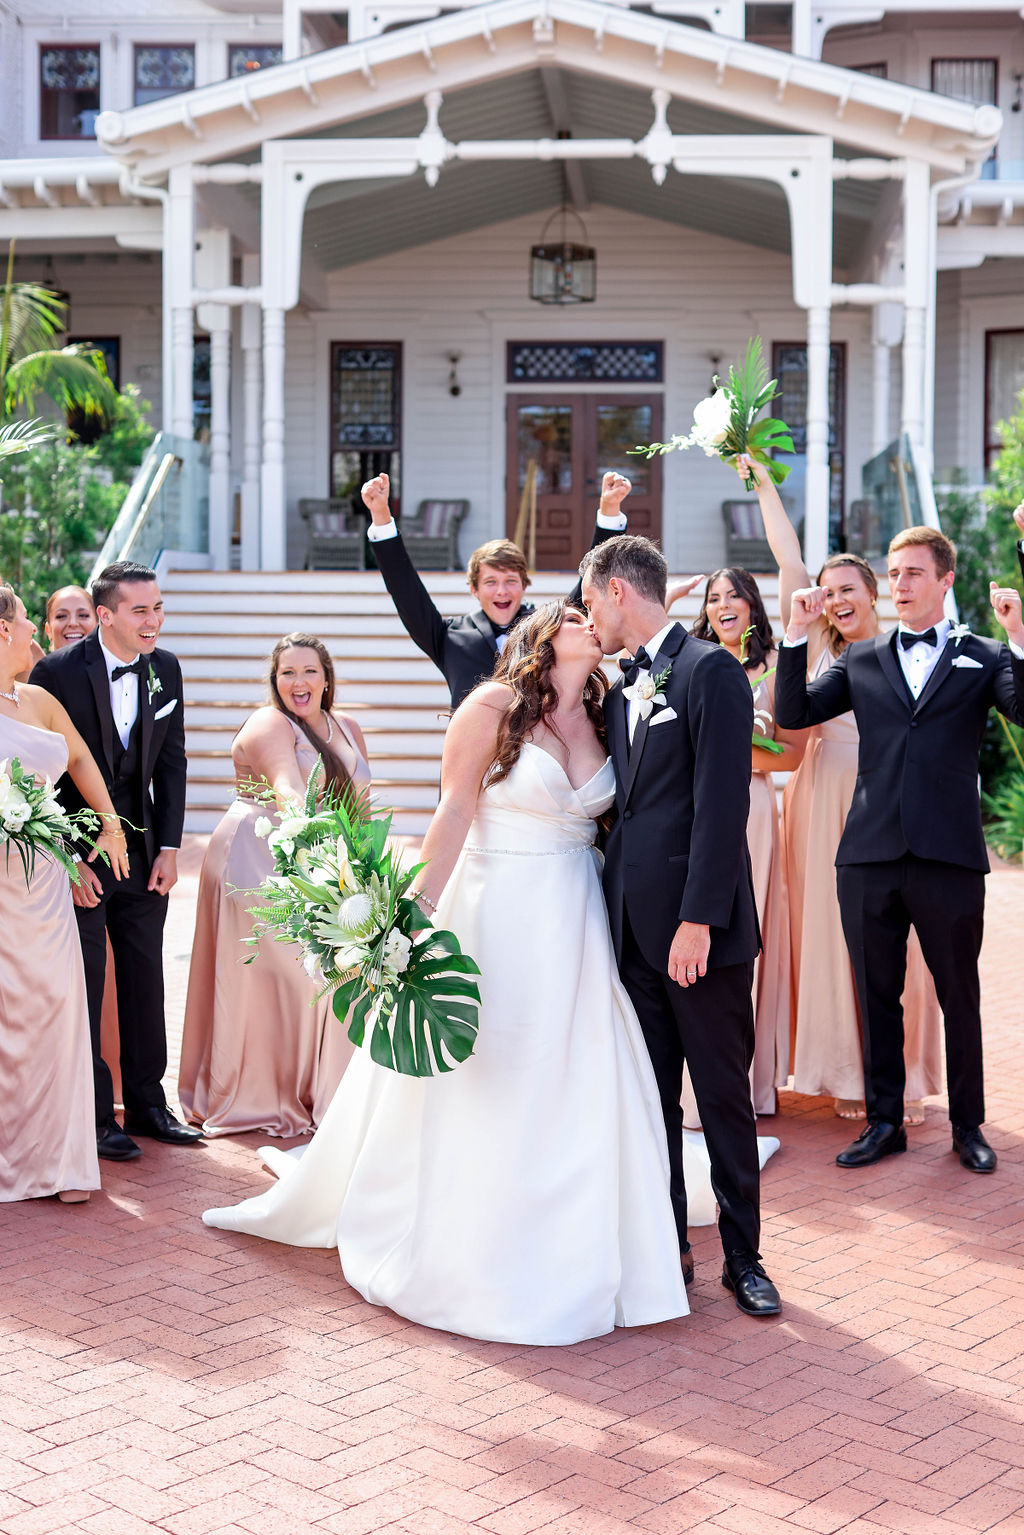 Group shot of Bride and groom kissing and bridal party cheering behind them at The Hotel Del Coronado in San Diego California |Photo by Sarah Block Photography.